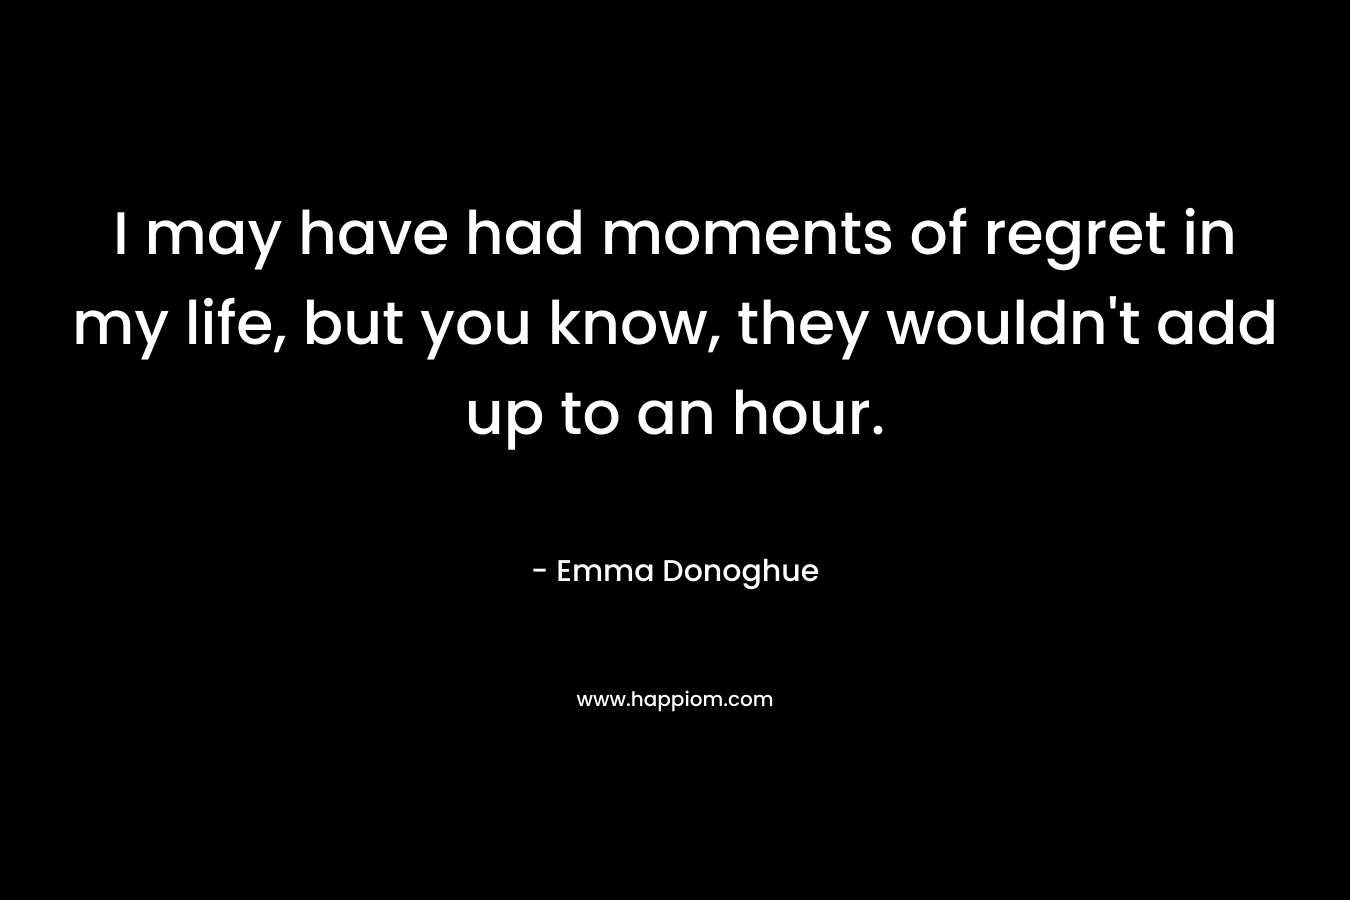 I may have had moments of regret in my life, but you know, they wouldn’t add up to an hour. – Emma Donoghue